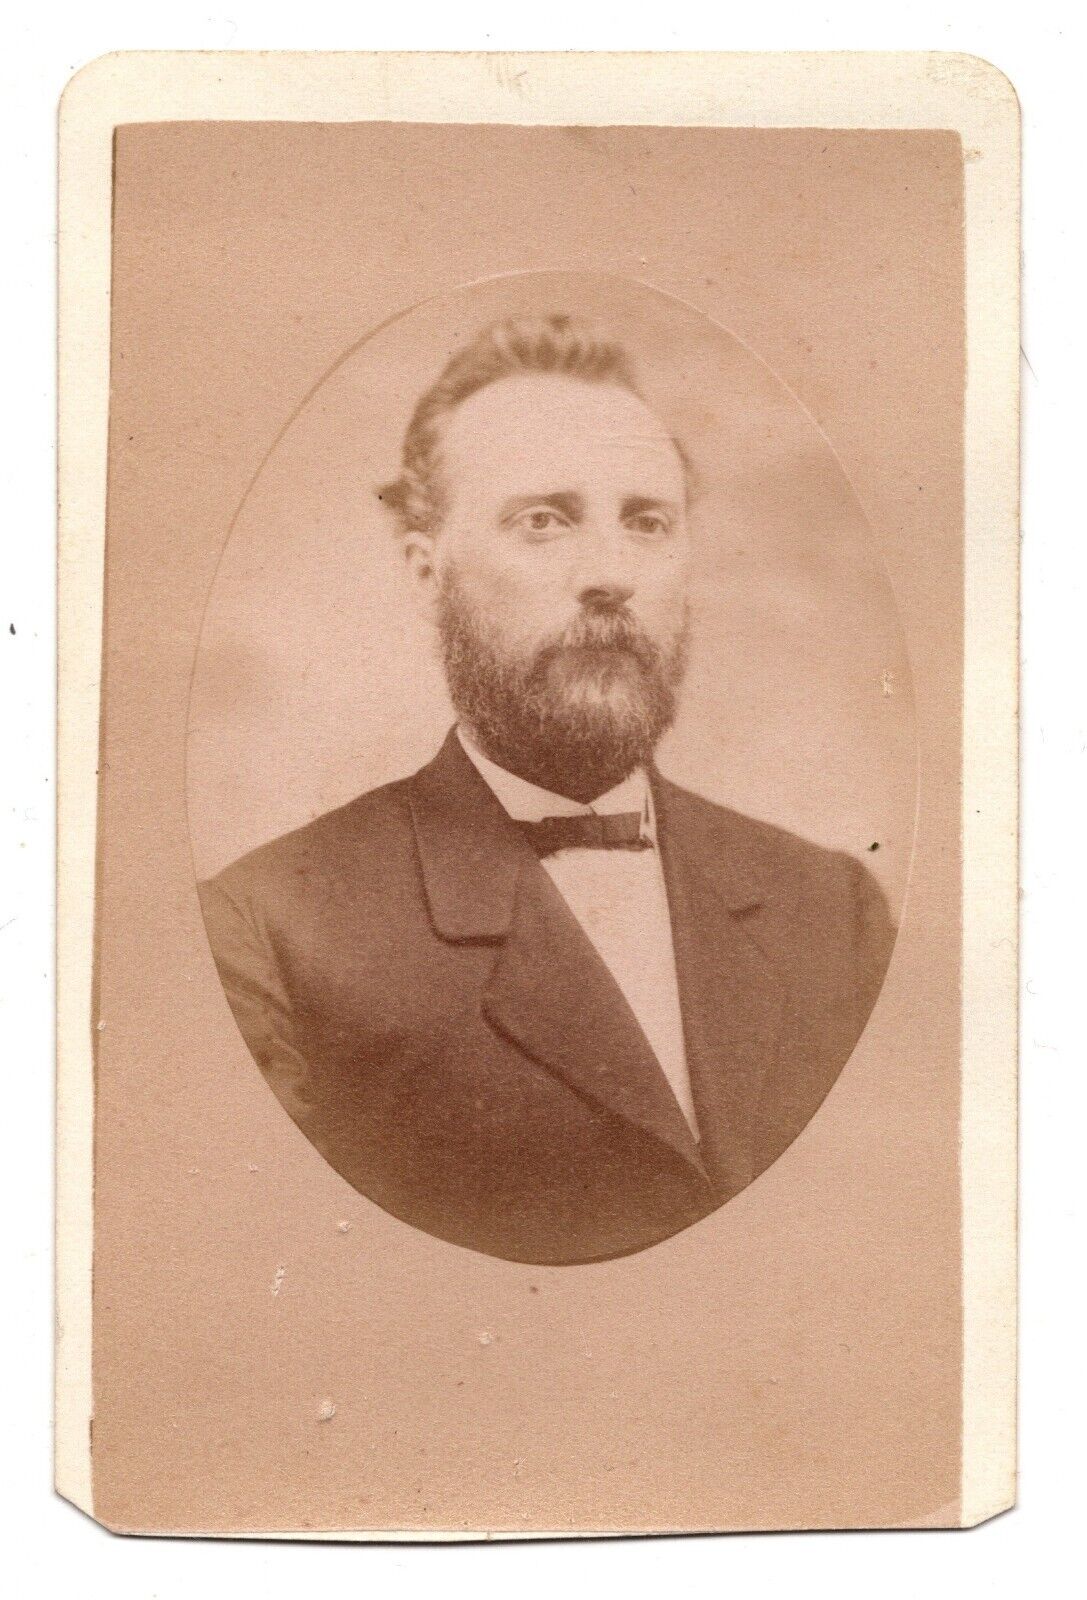 ANTIQUE CDV C. 1870s G.N. WESTS HANDSOME BEARDED MAN IN SUIT TRAVELLING ARTIST